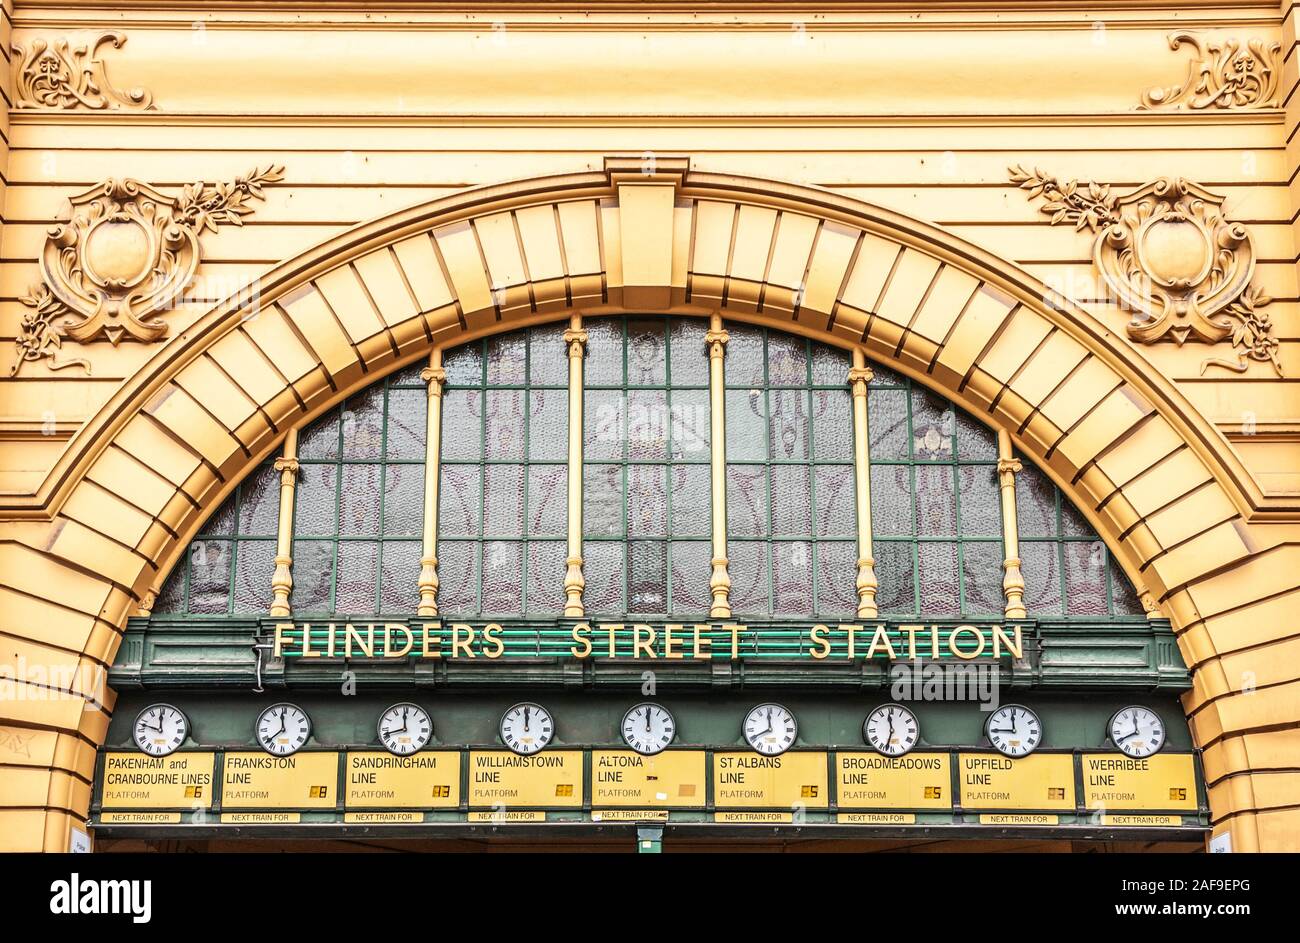 Melbourne, Australia - November 17, 2009: Detail of yellow facade of Flinders Street Station with window under large bow, name of building, freso and Stock Photo